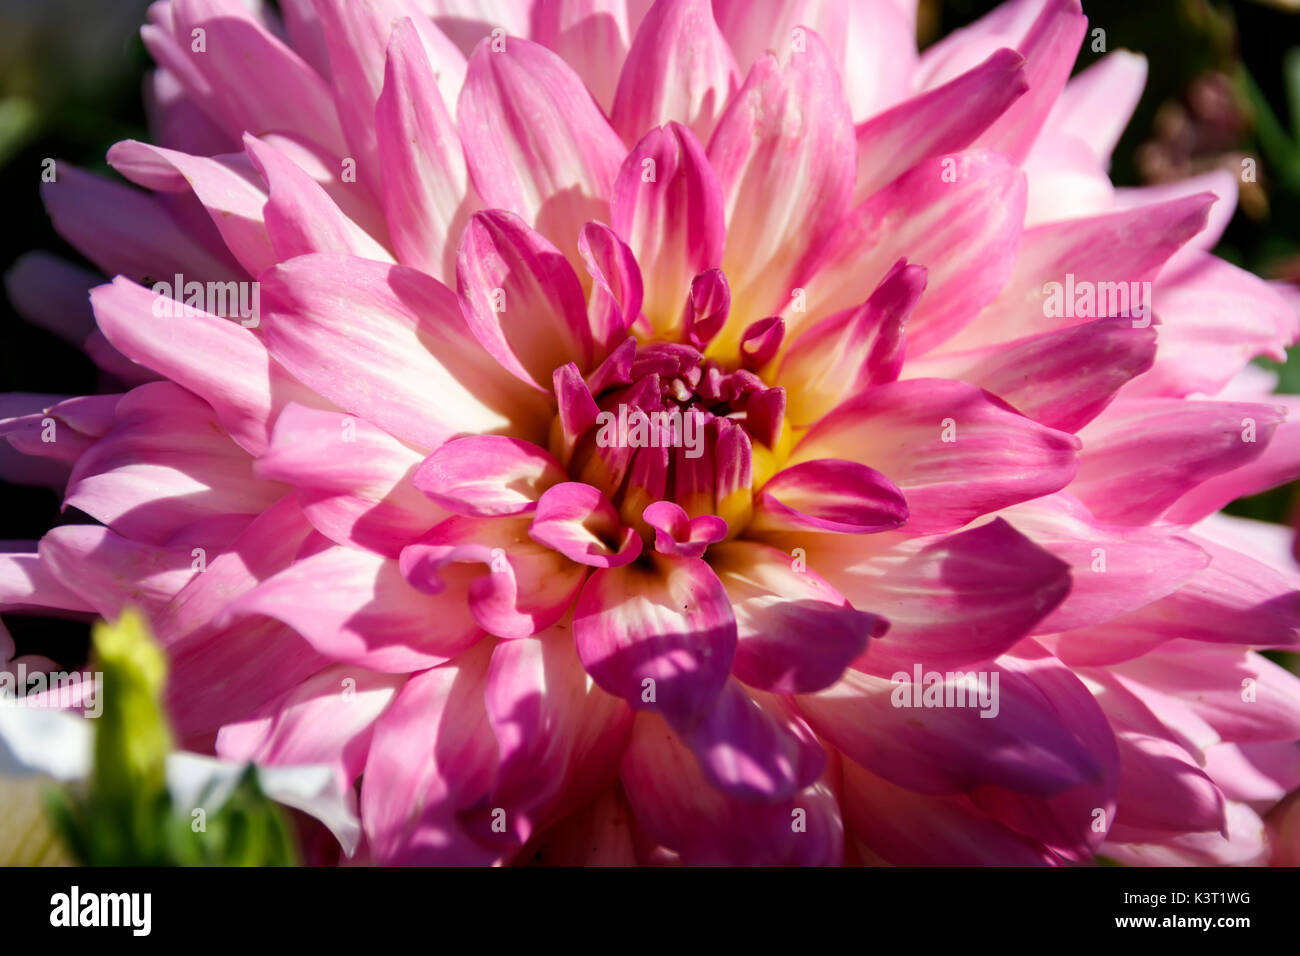 Large flower of pink dahlia close-up Stock Photo